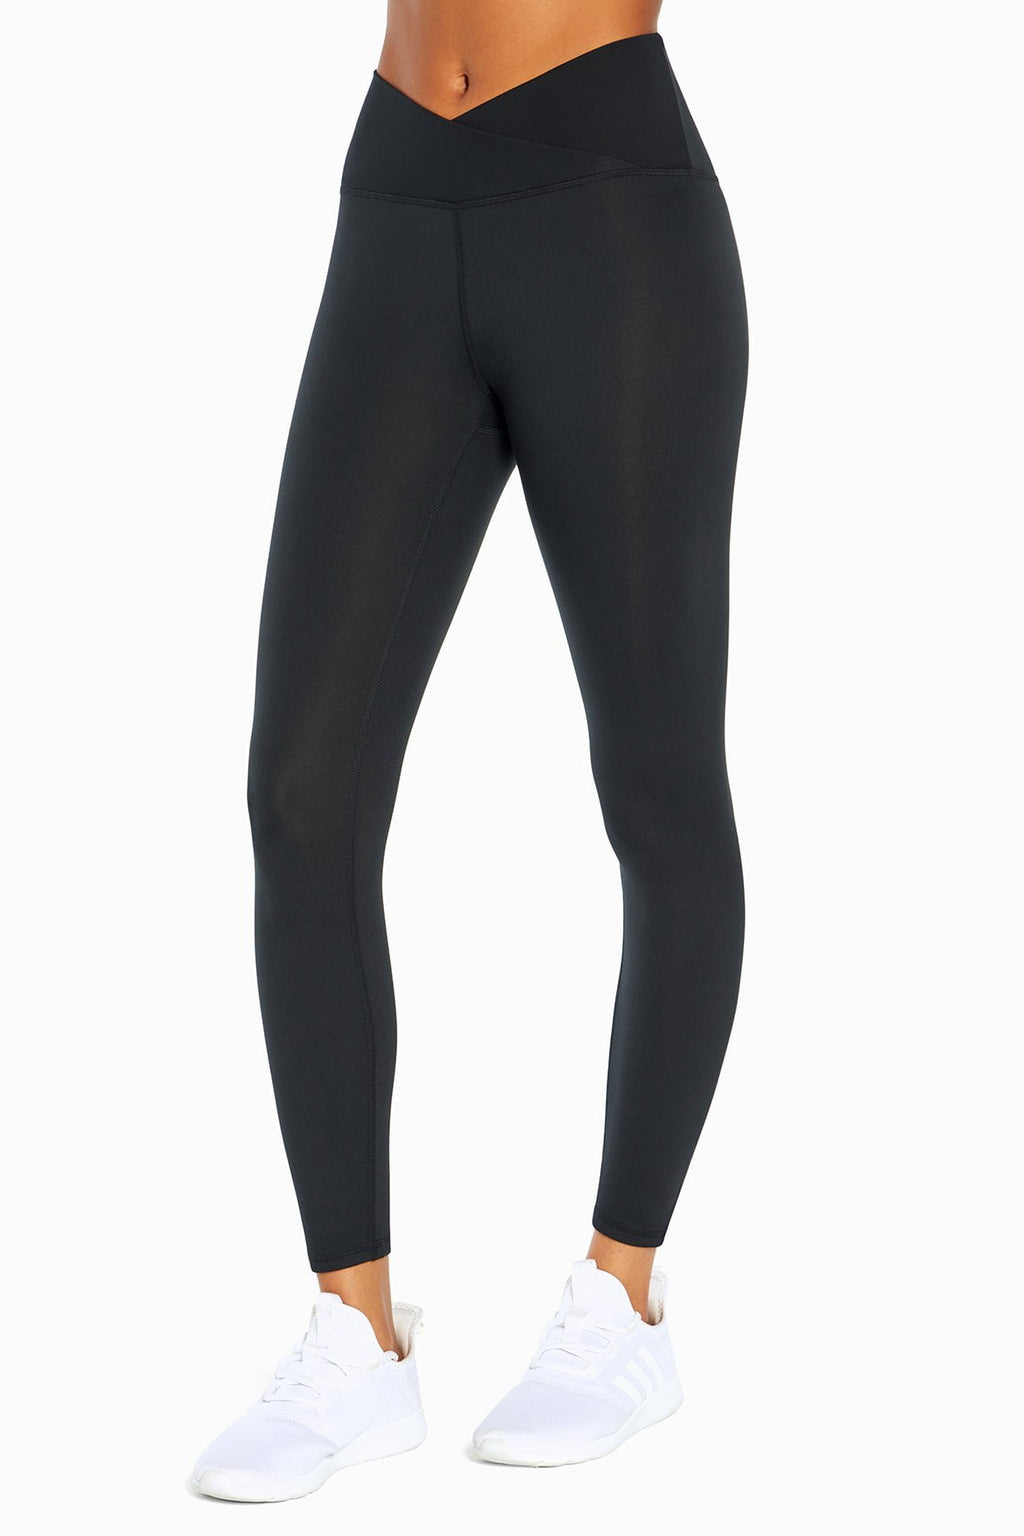 iniber High Waisted Yoga Pants with Pockets for Zambia